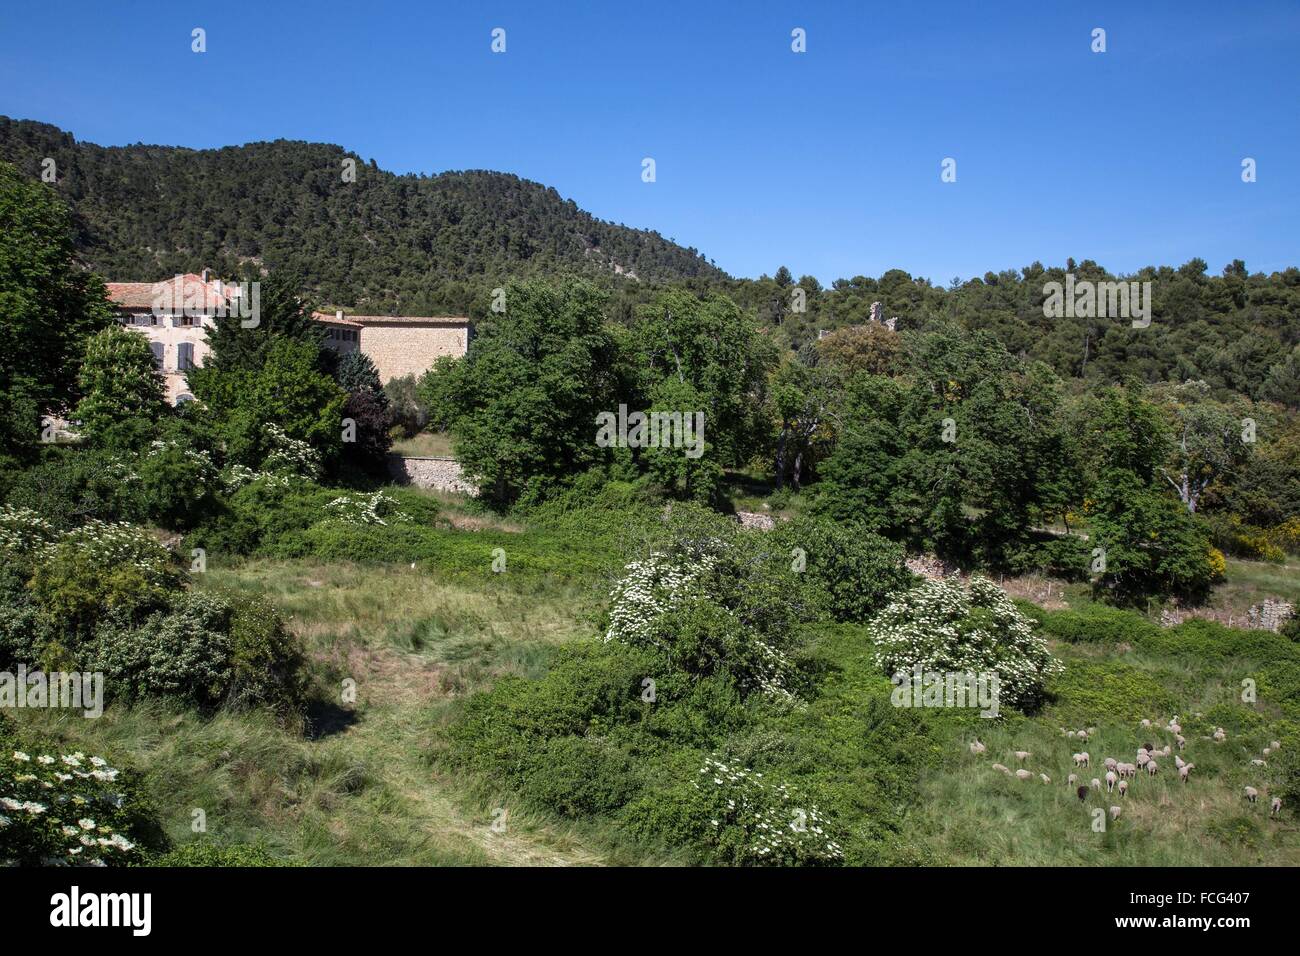 REGIONAL NATURE PARK OF THE LUBERON, VAUCLUSE, FRANCE Stock Photo